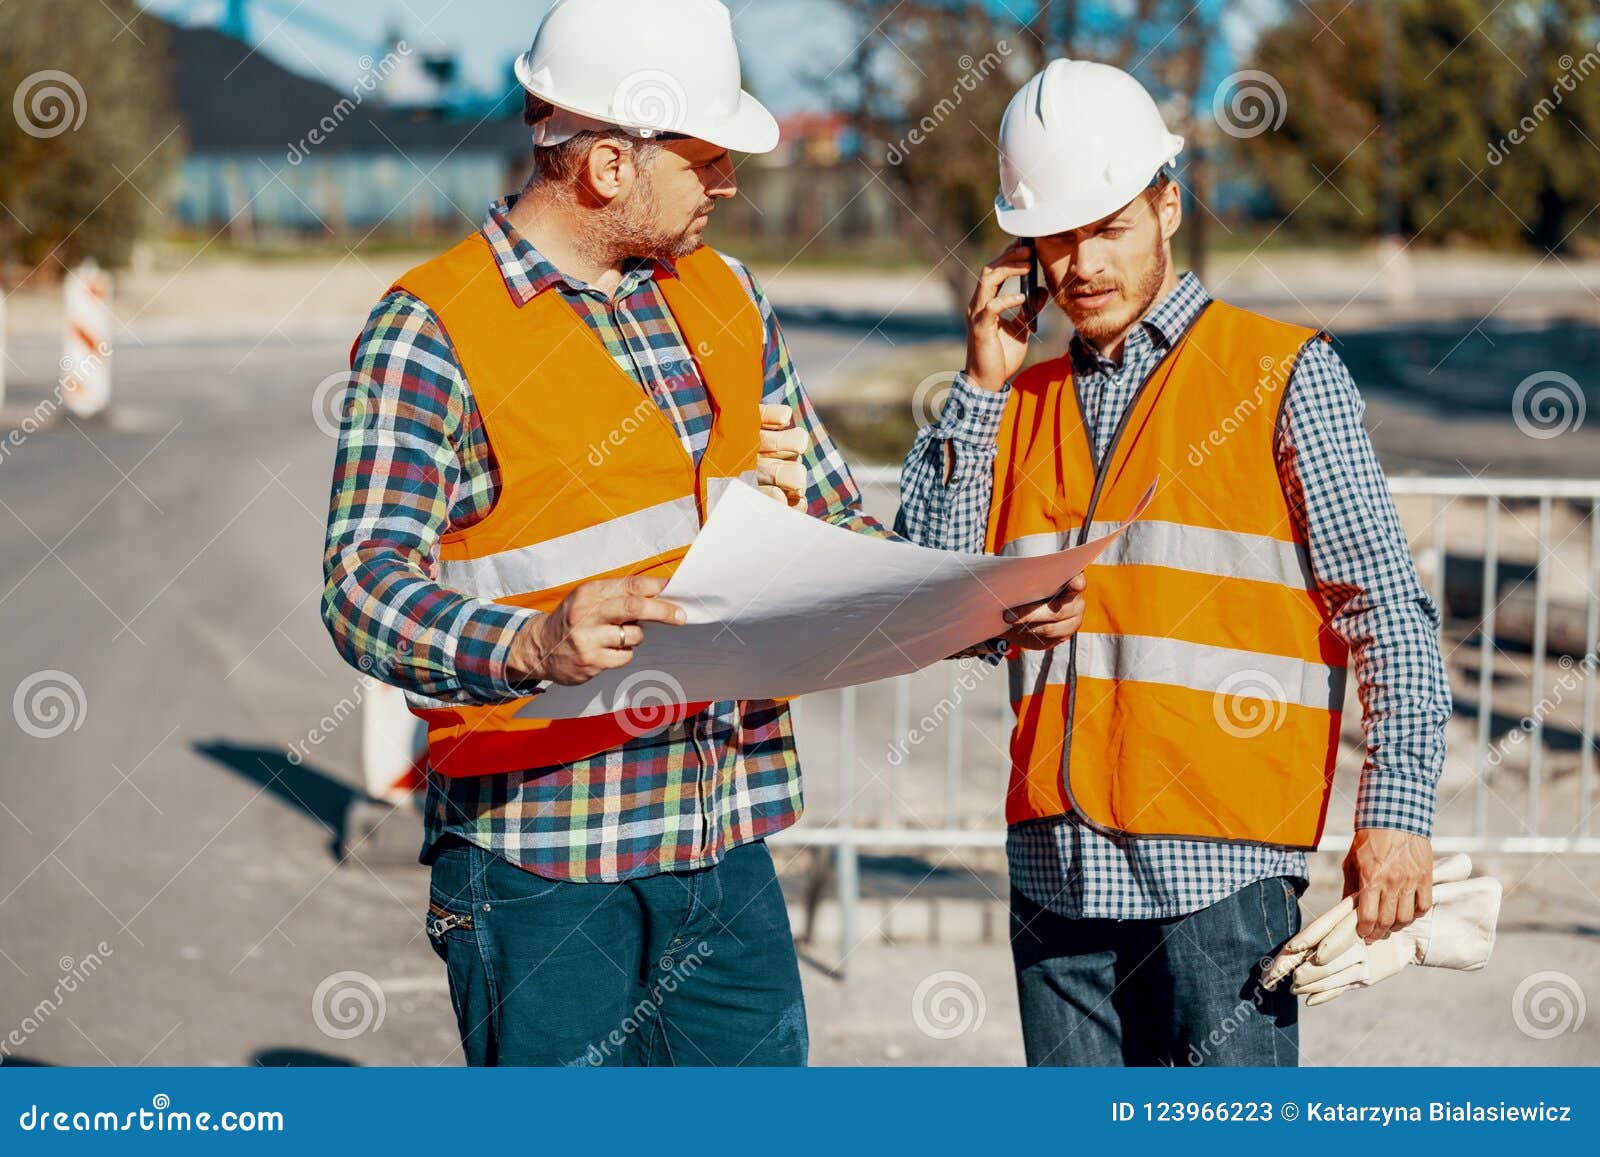 worker and construction manager consulting on a project with eng